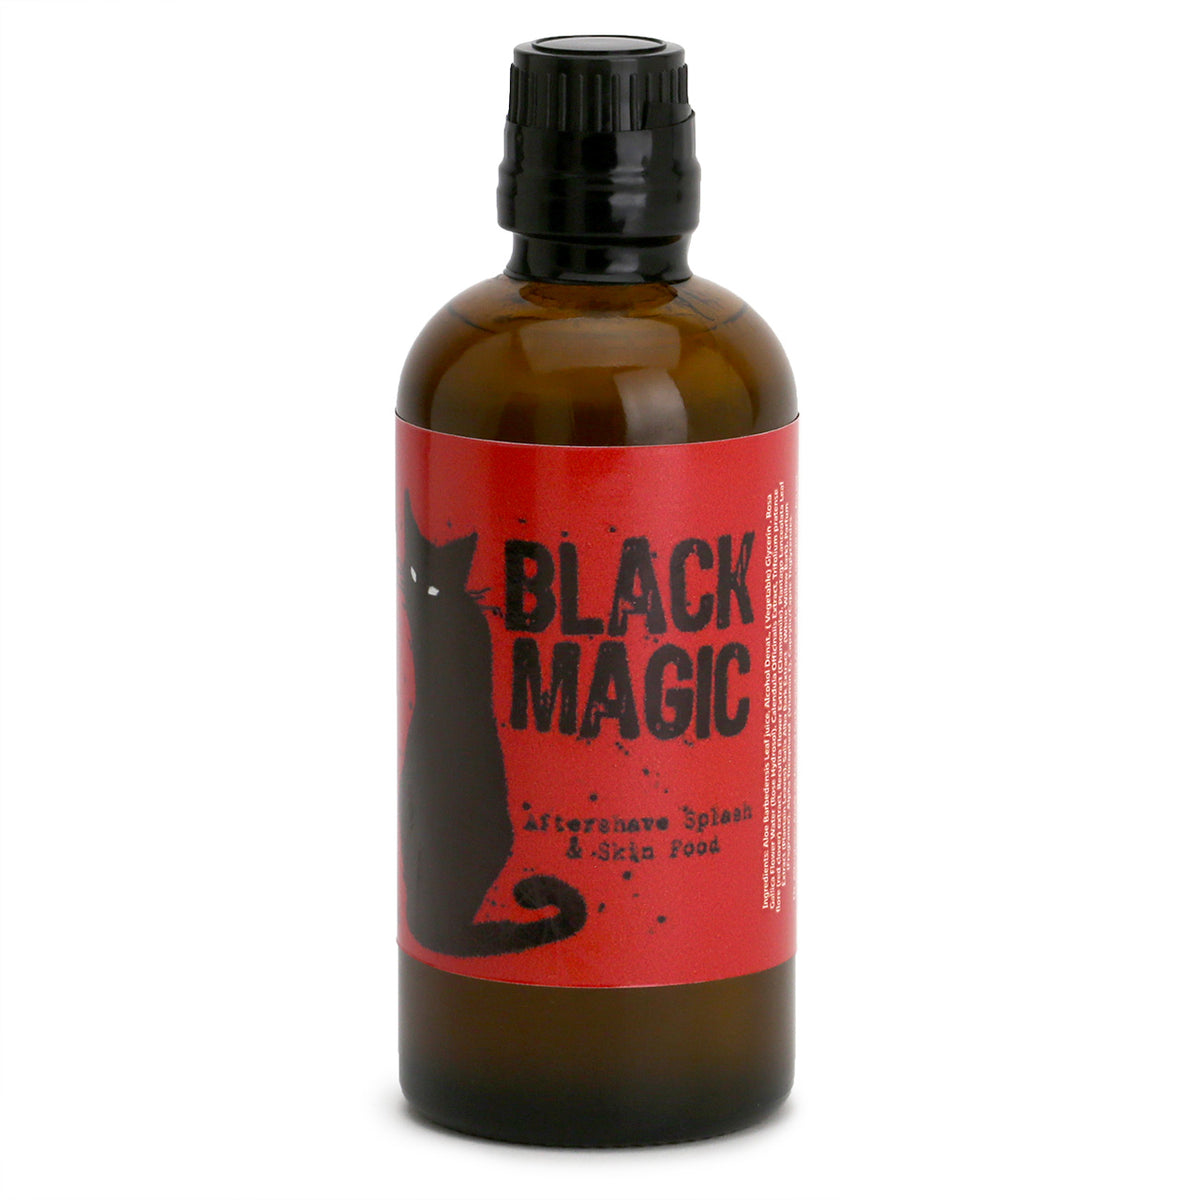 Ariana &amp; Evans Black Magic After Shave Splash &amp; Skin Food The Label is red with a black cat silhouette with white eyes